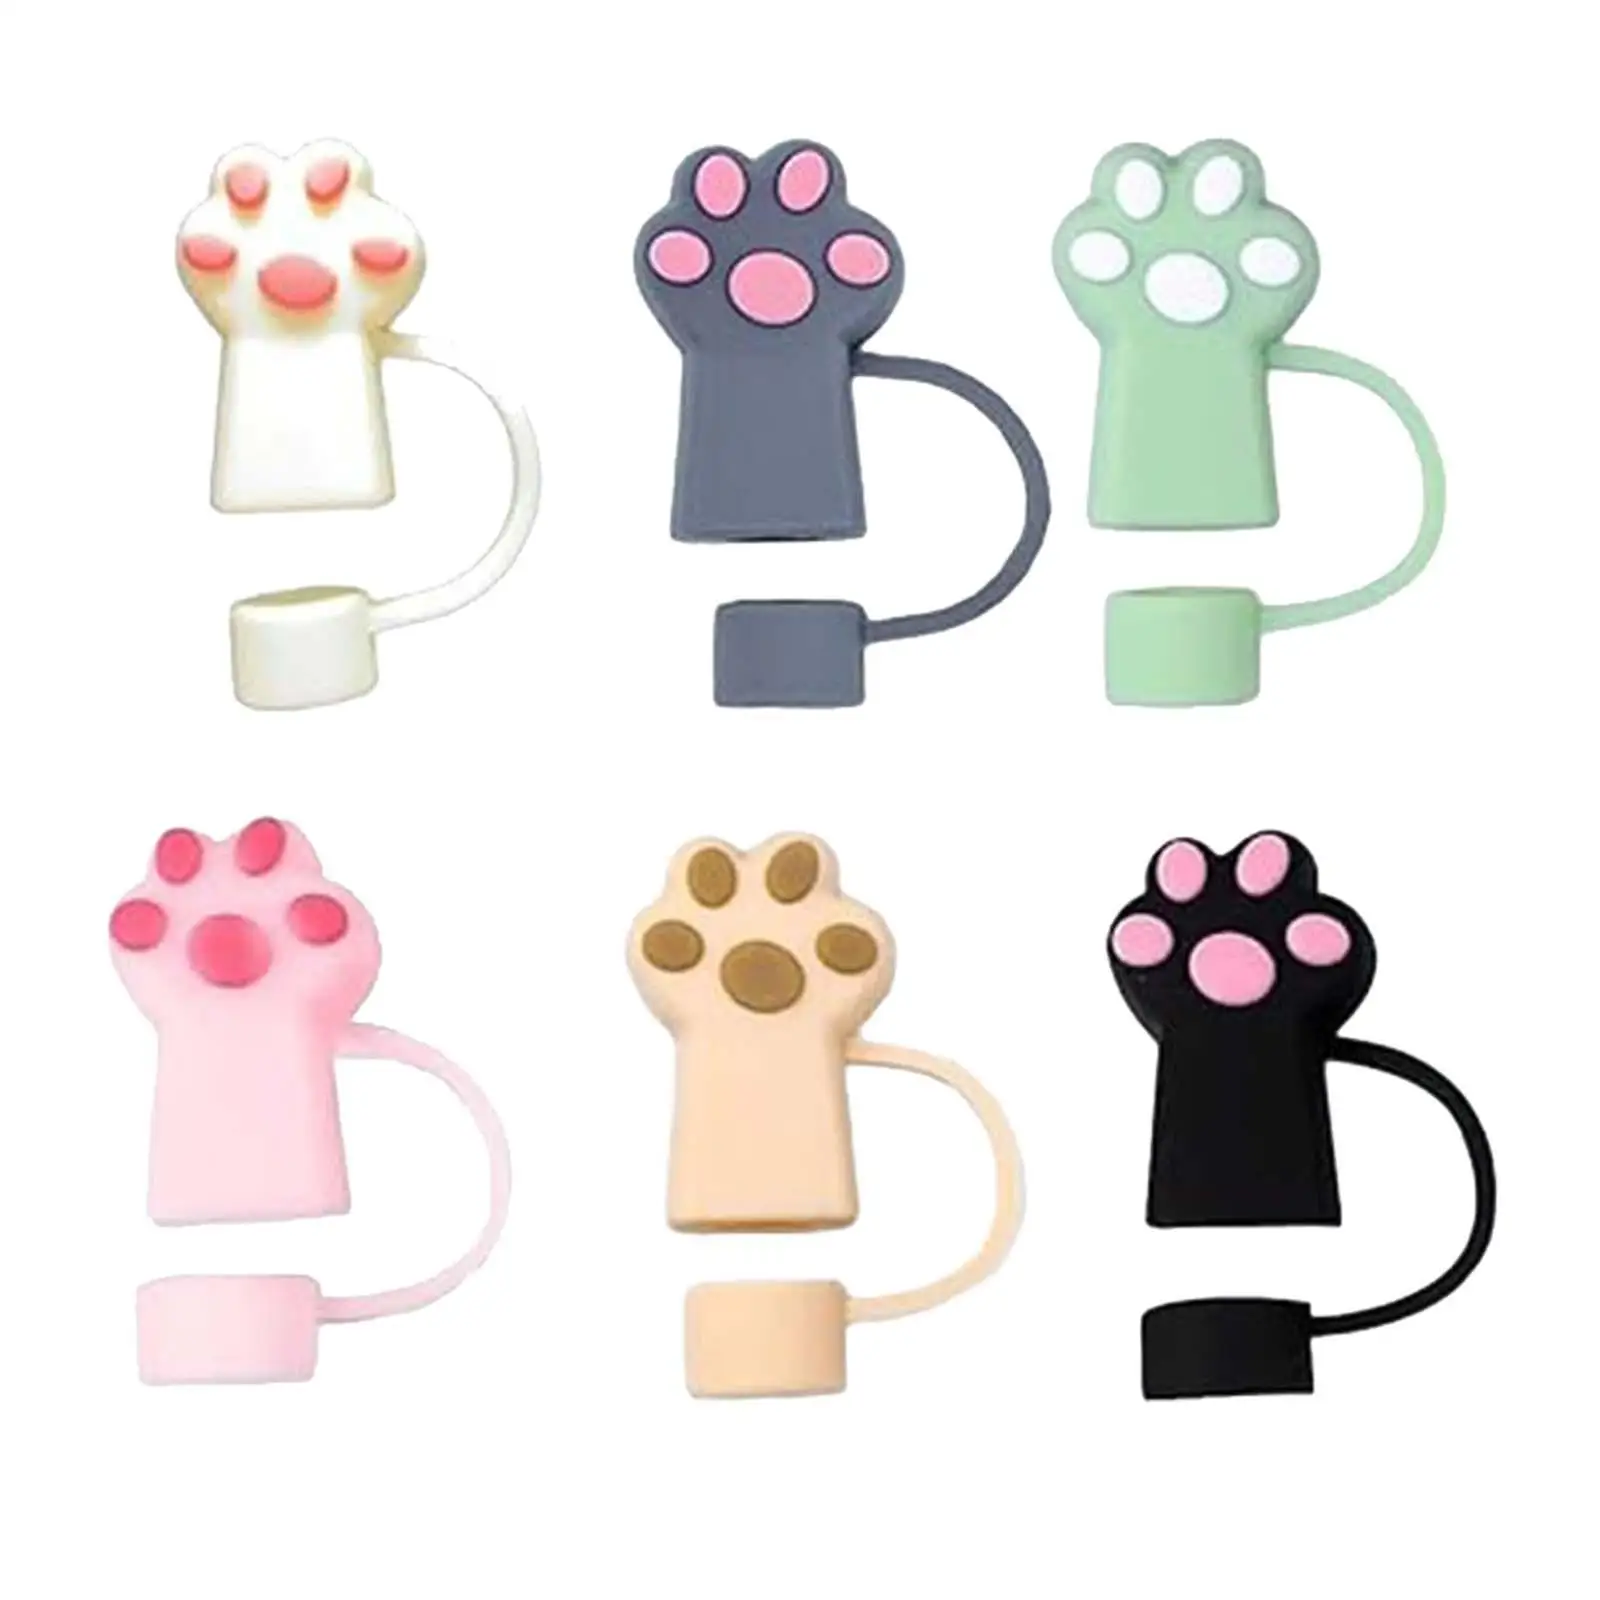 

6x Silicone Straw Cover Cap Portable Cute for 10mm Straws Dustproof Cartoon Splashproof Airtight Seal Party Favors Straw Topper